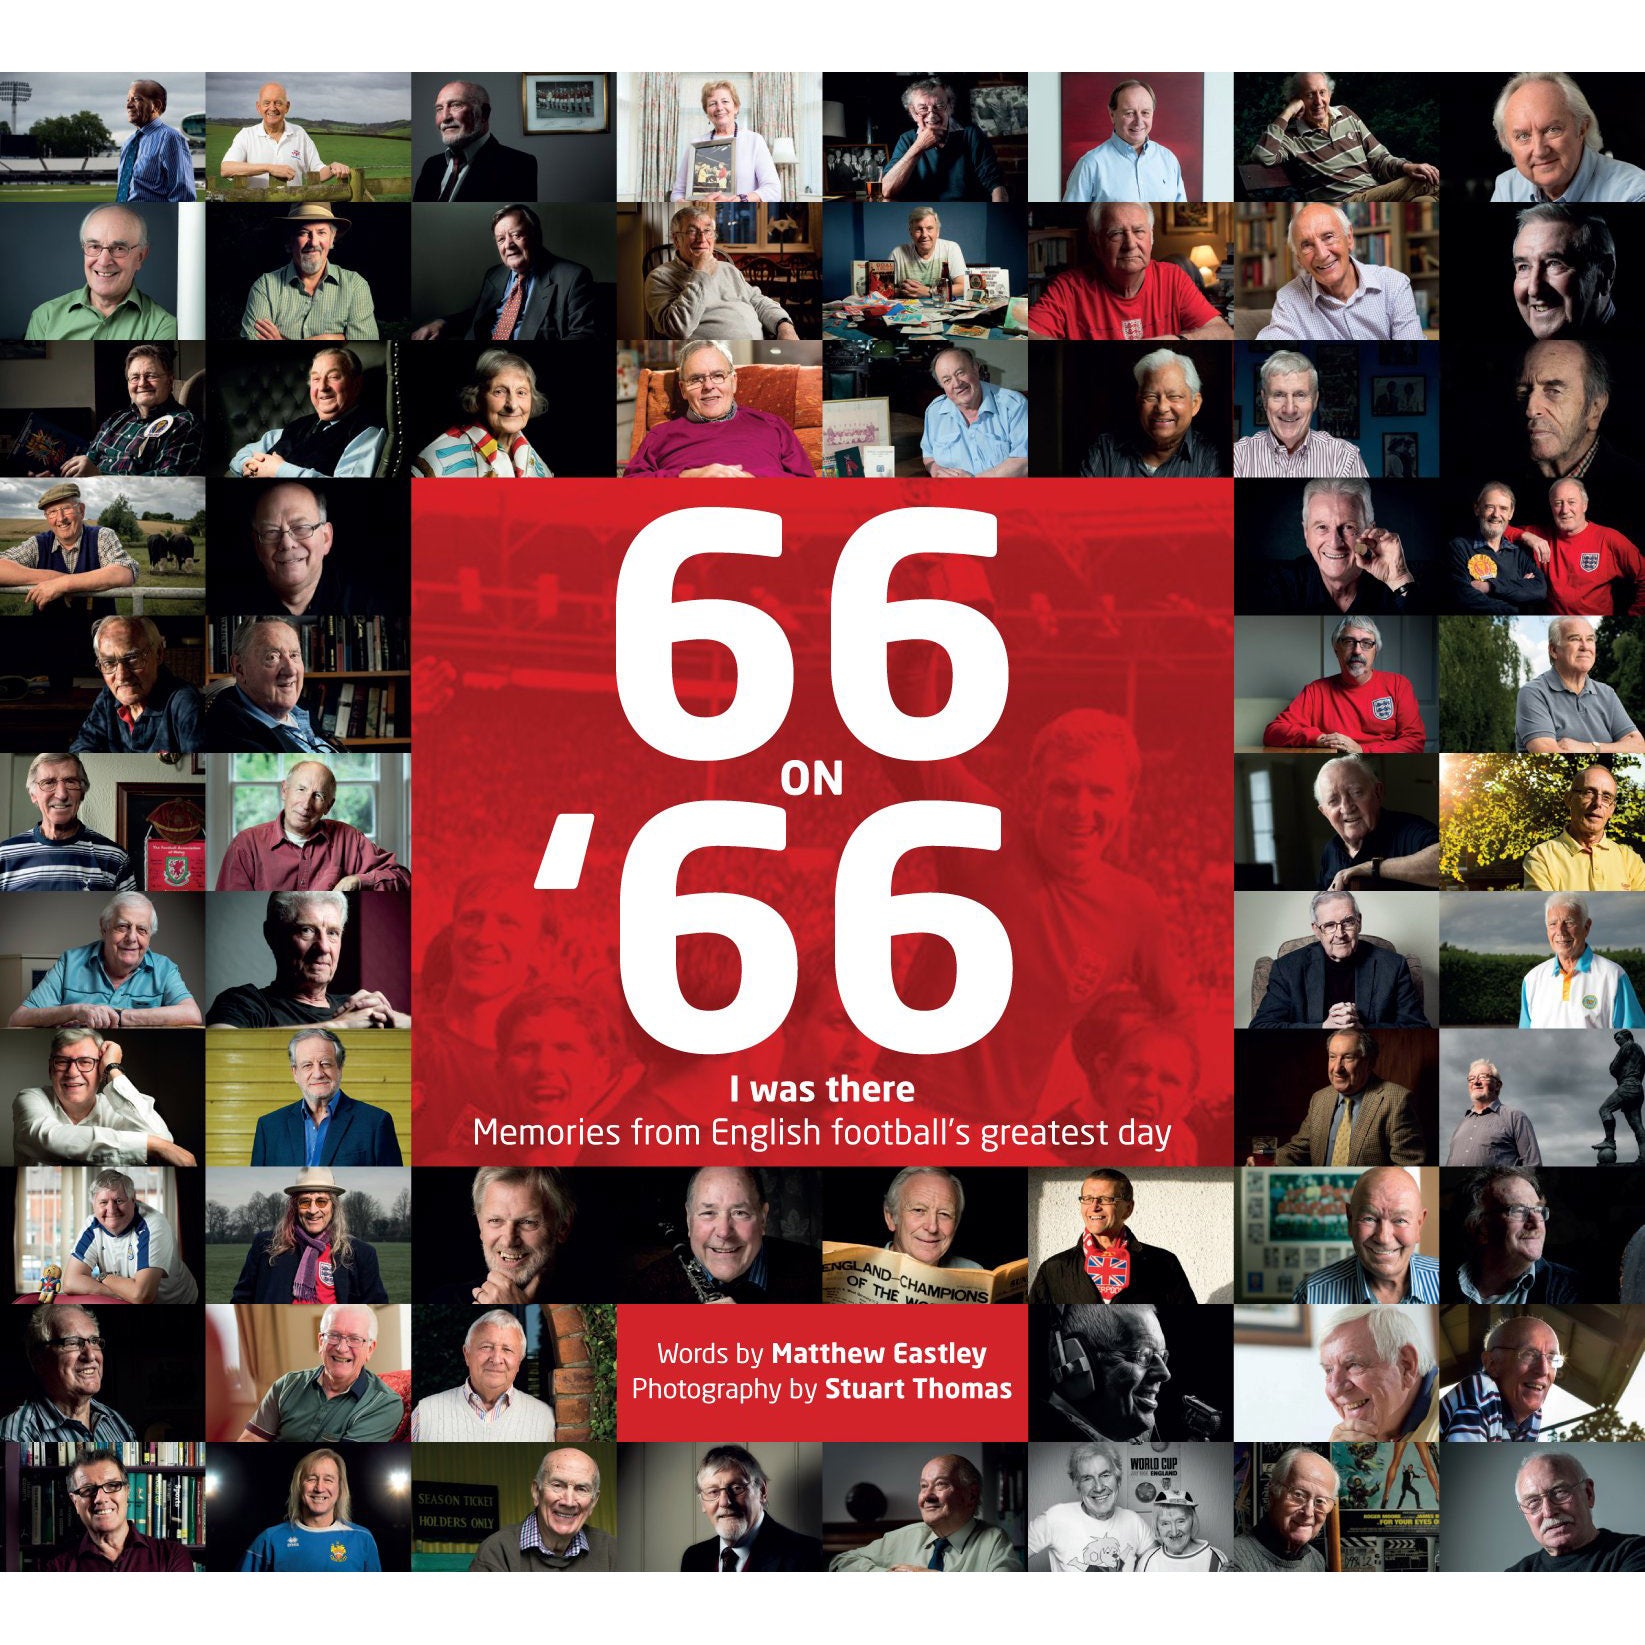 66 on ’66 – I was there – Memories from English football's greatest day